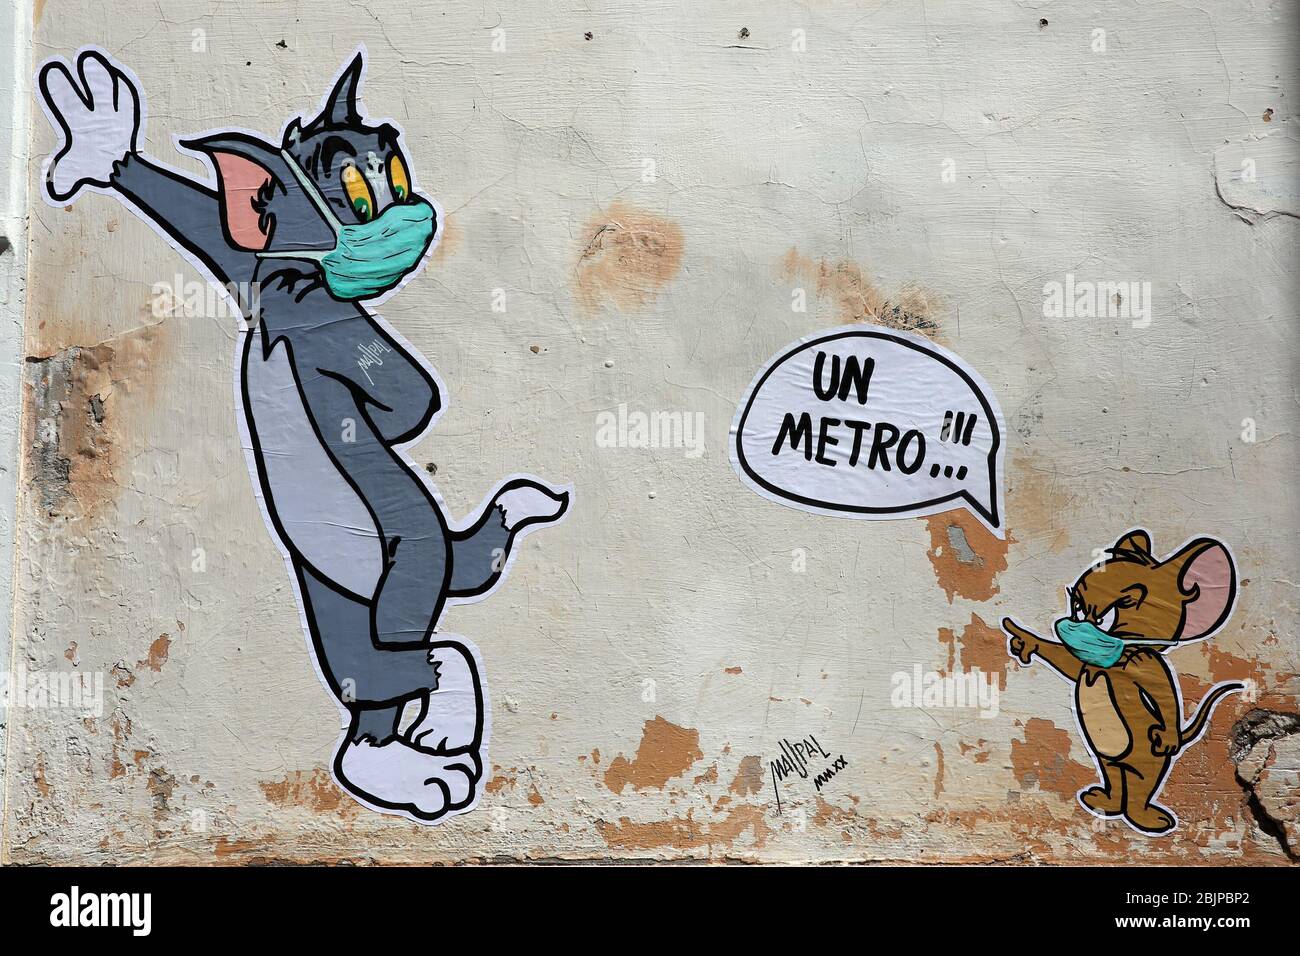 Mauro Pallotta, aka Maupal, created a new mural in Borgo Pio, a few meters from the Vatican and St. Peter's square. The work depicts the characters of the cartoon Tom & Jerry. Both Tom, the cat, and Jerry, the mouse, wear a mask. Jerry, who is usually chased by Tom, scolds the other and tells him to respect the safety distance, one meter (Alberto Lo Bianco/Fotogramma, Rome - 2020-04-30) p.s. la foto e' utilizzabile nel rispetto del contesto in cui e' stata scattata, e senza intento diffamatorio del decoro delle persone rappresentate Stock Photo